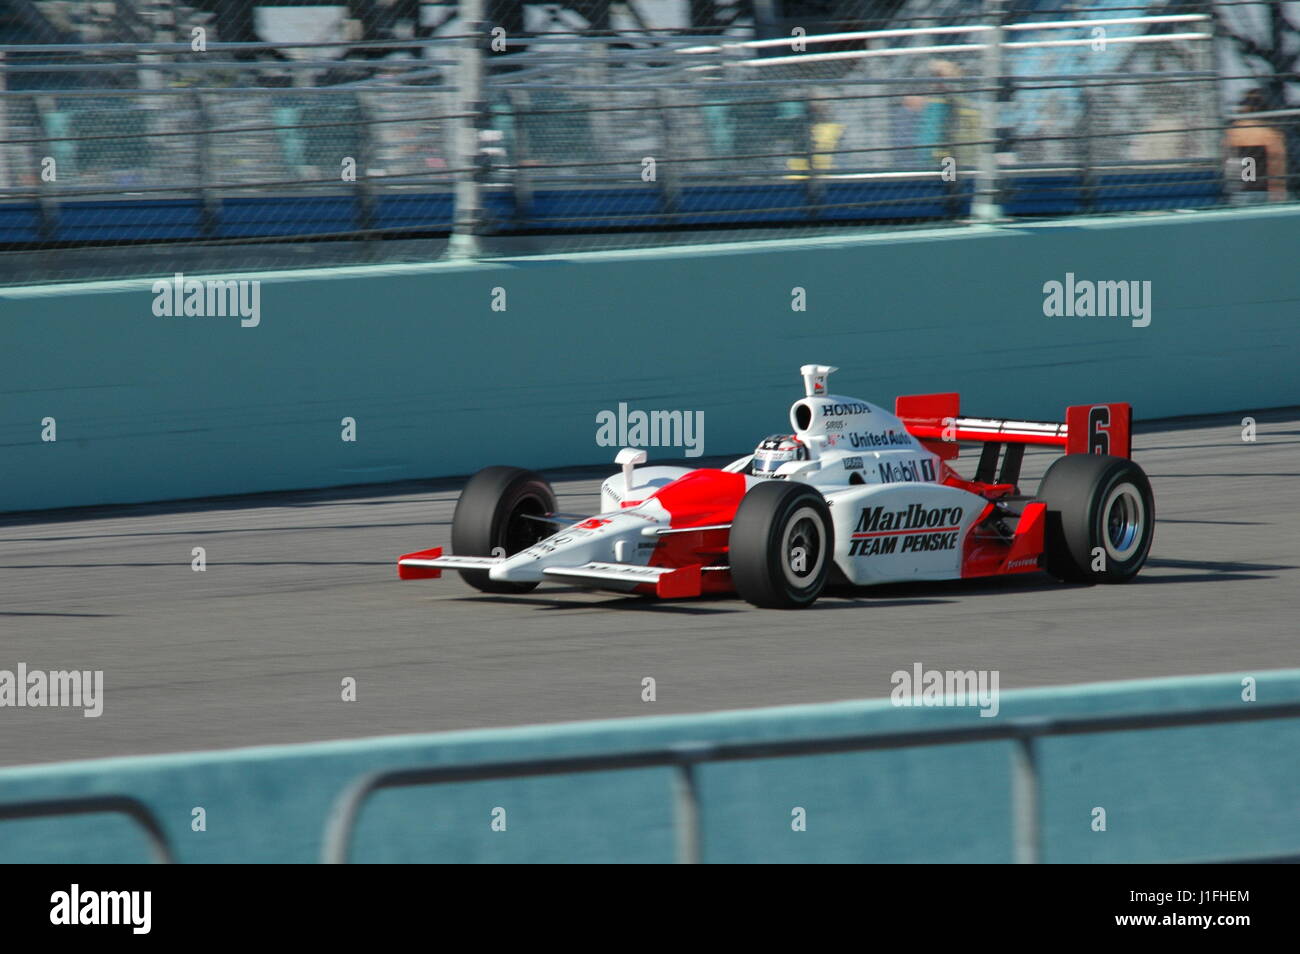 Indy racing Homestead Miami Speedway Fahrer in Autos Stockfoto